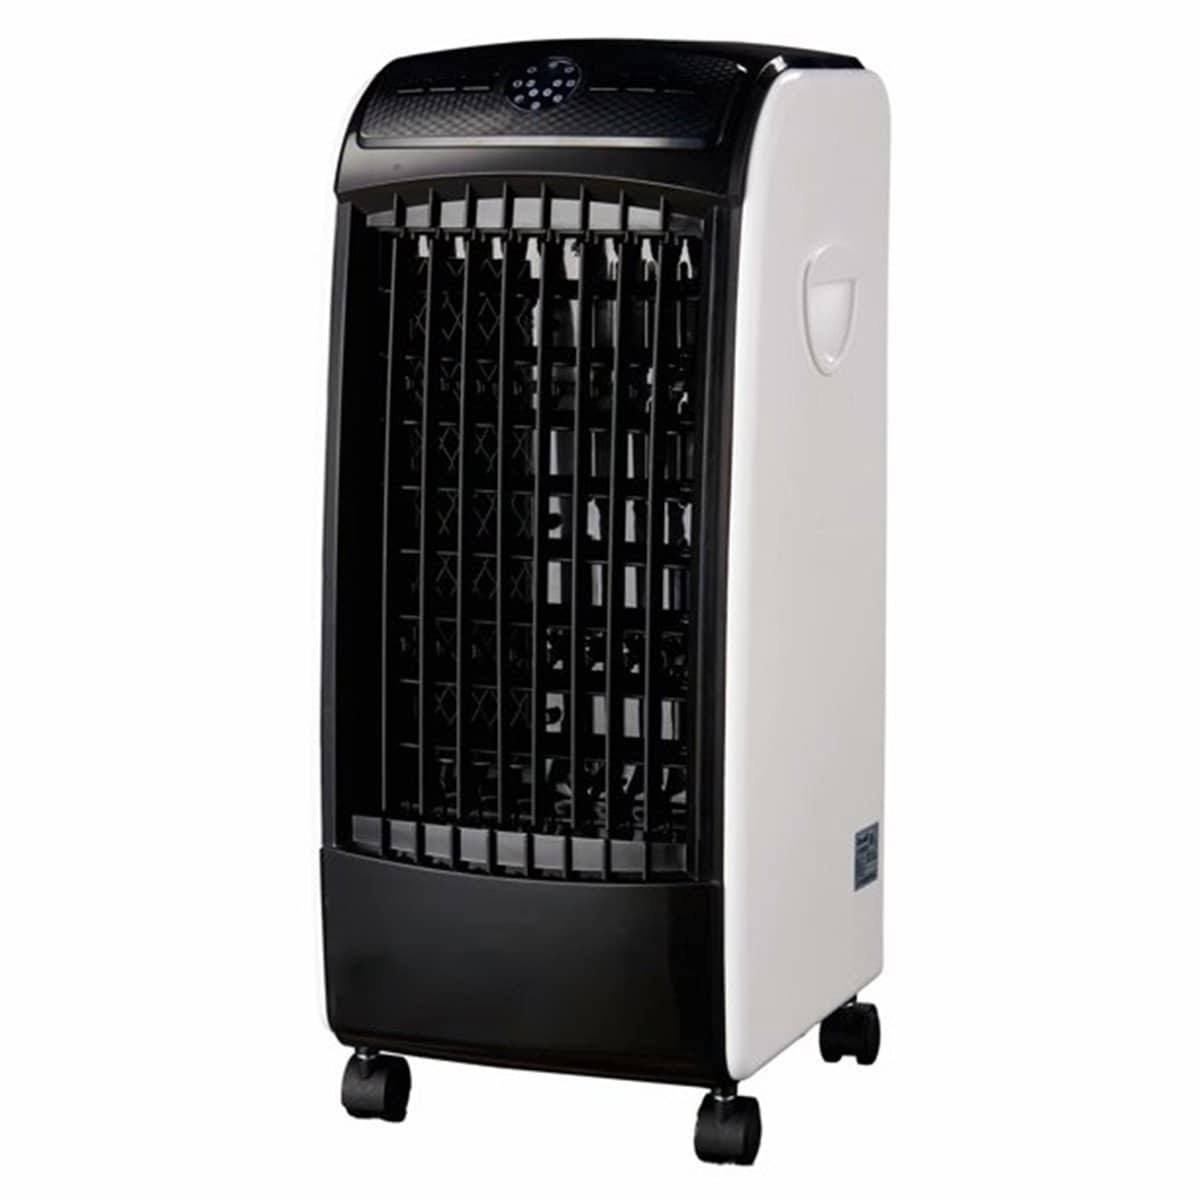 https://ak1.ostkcdn.com/images/products/is/images/direct/d0553503ece350a0759e4b149b805870dca9346e/3-In-1-Evaporative-Air-Cooler-Fan-Humidifier-with-Remote-Control.jpg